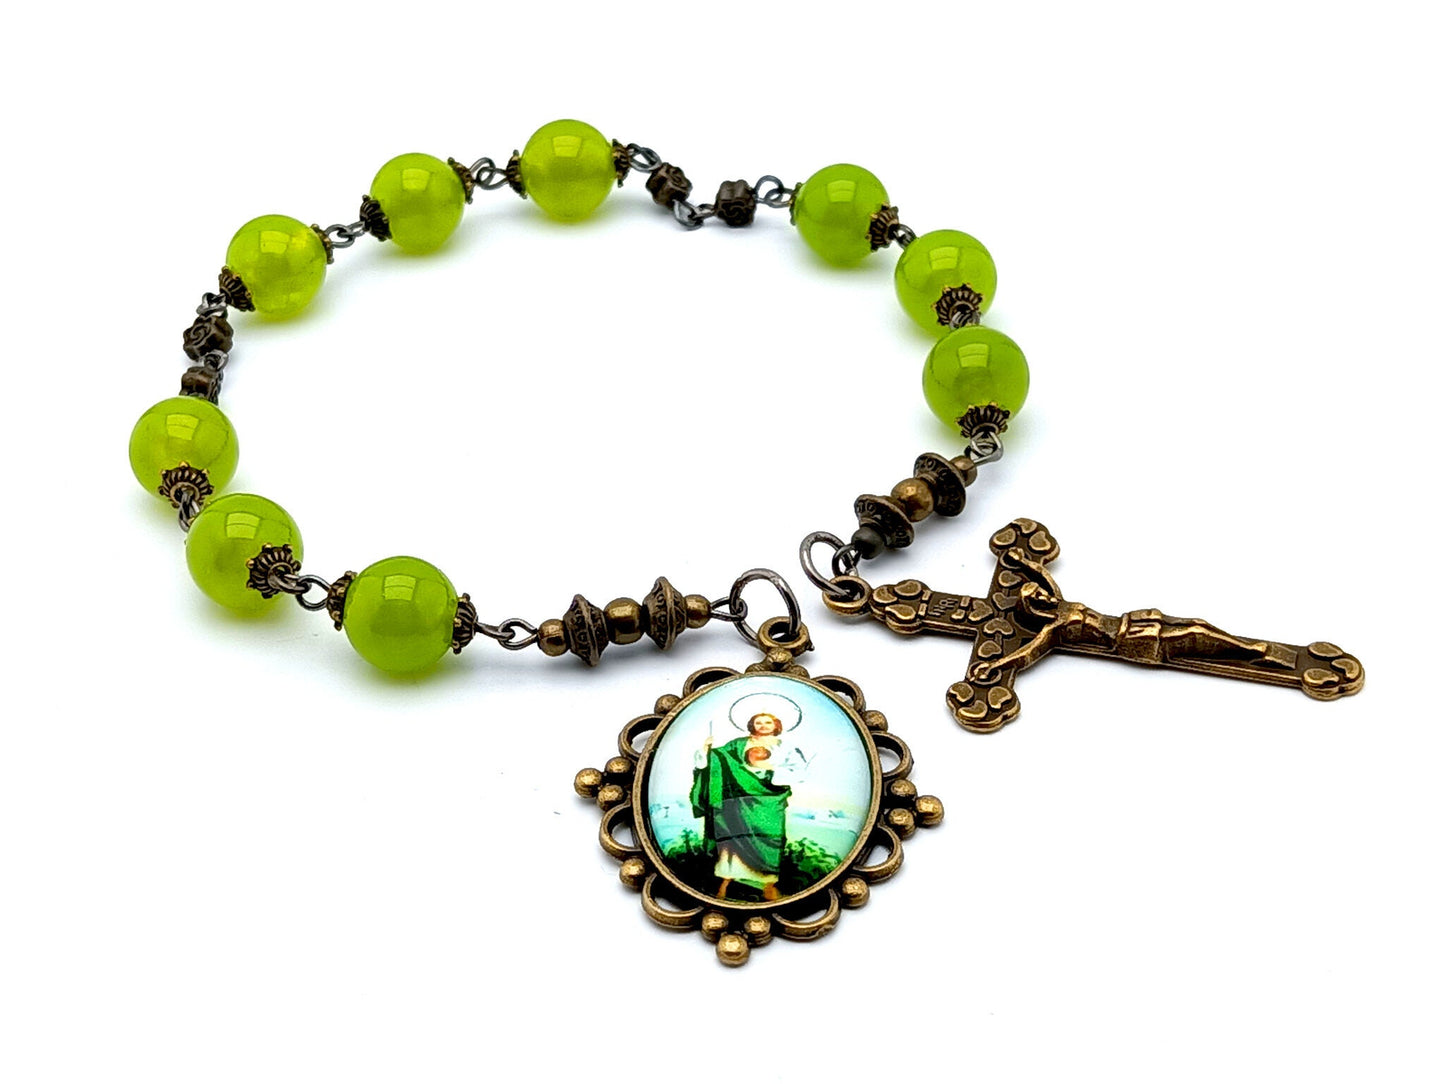 Saint Jude unique rosary beads prayer chaplet with peridot gemstone beads, bronze crucifix and picture end medal.